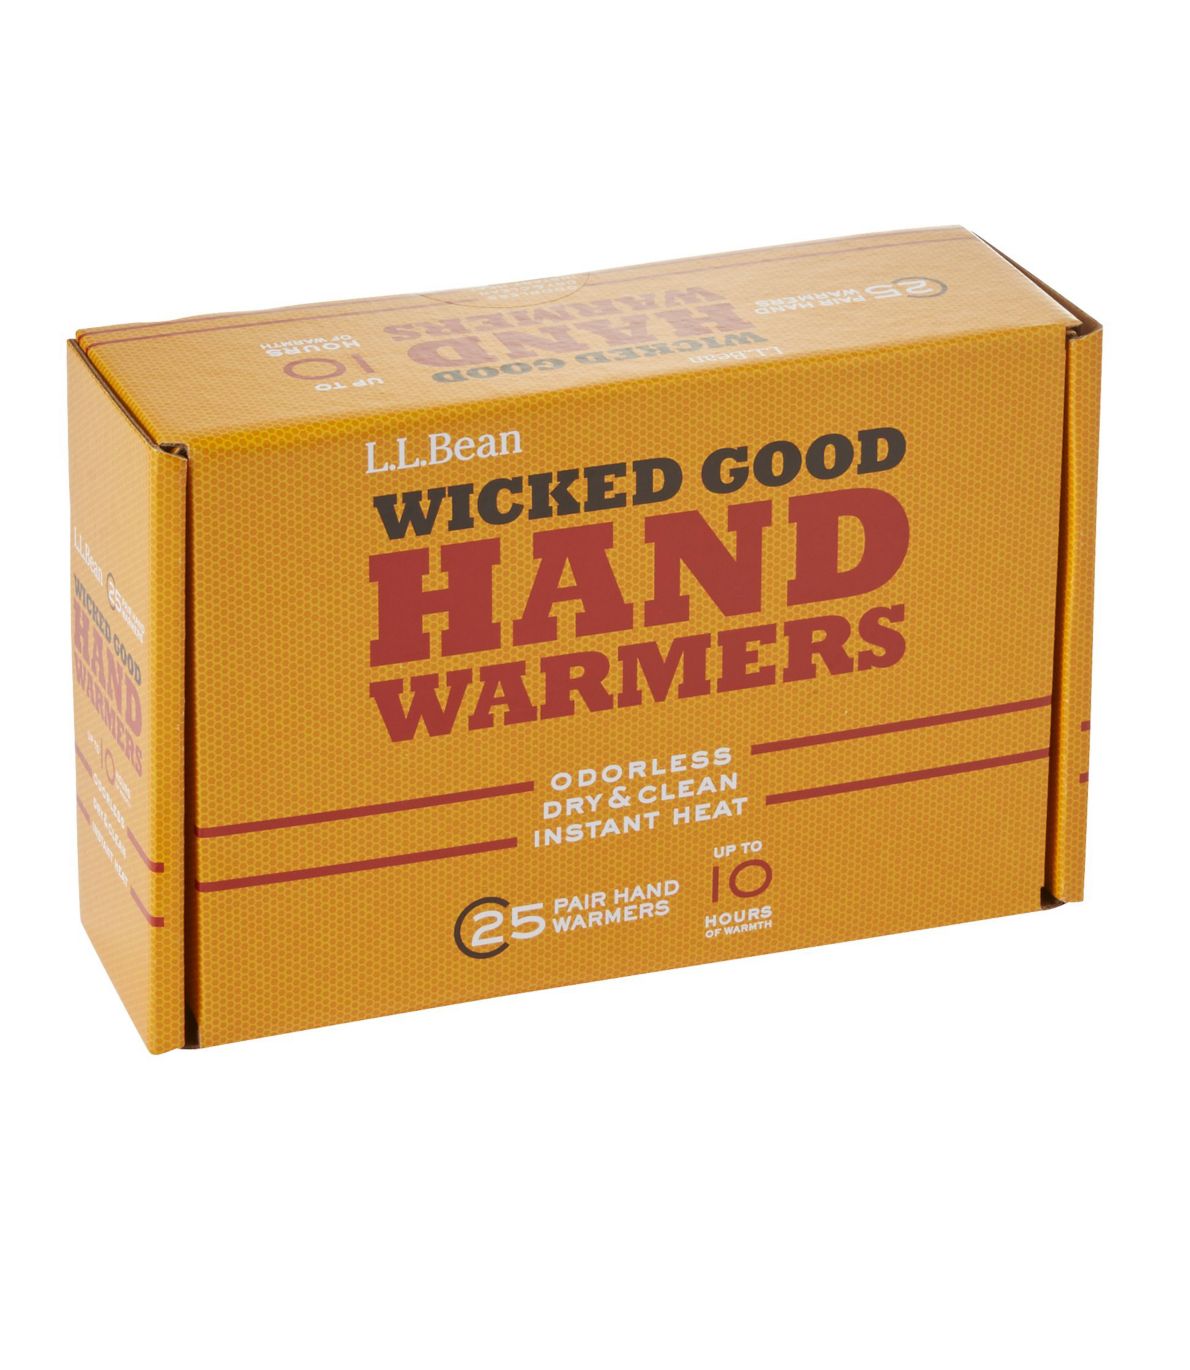 Wicked Good Hand Warmers, 25-pack